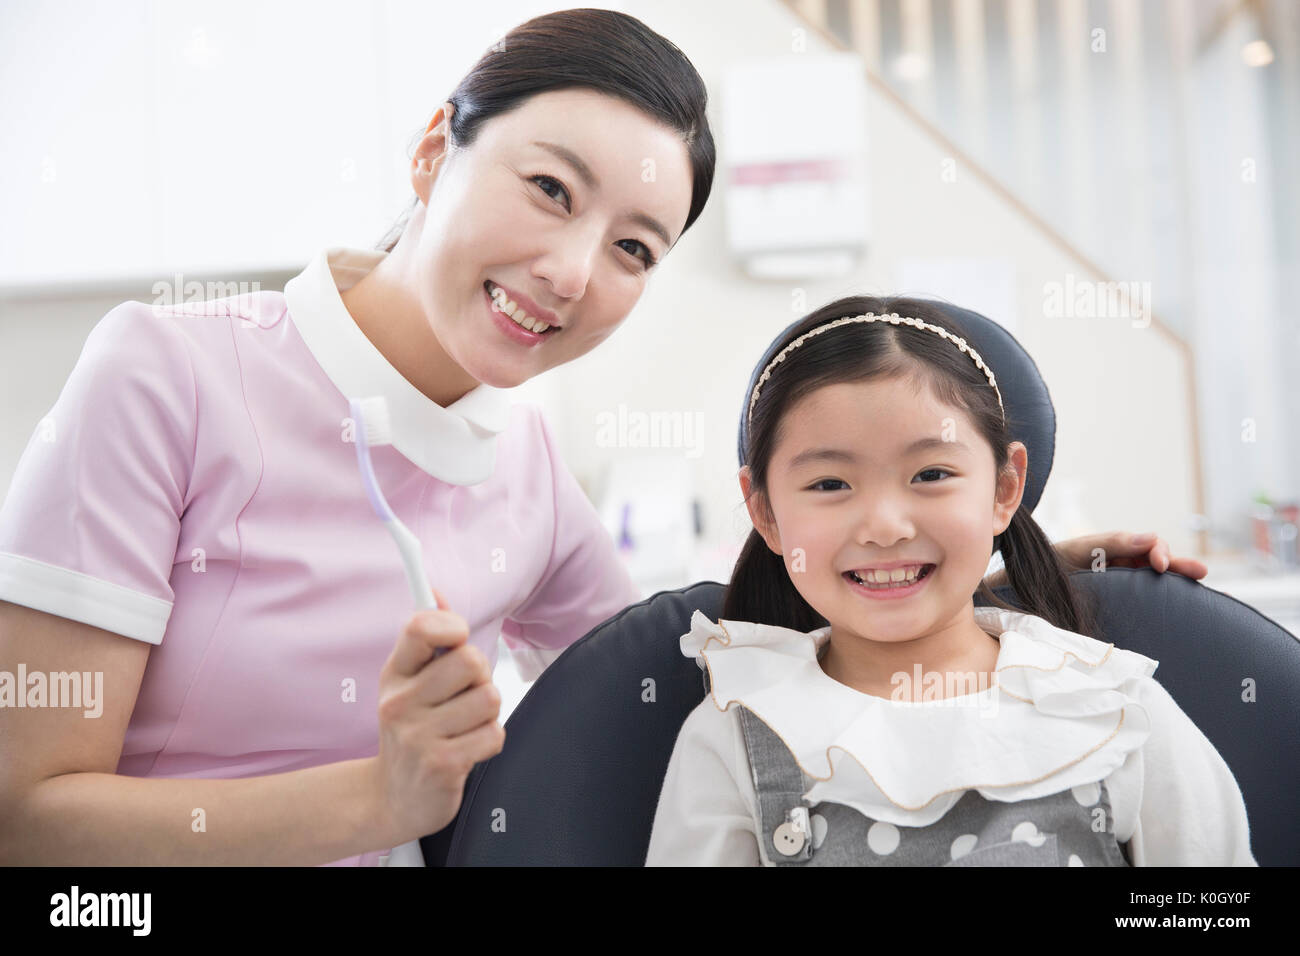 Portrait of smiling dental hygienist and smiling girl patient Stock Photo